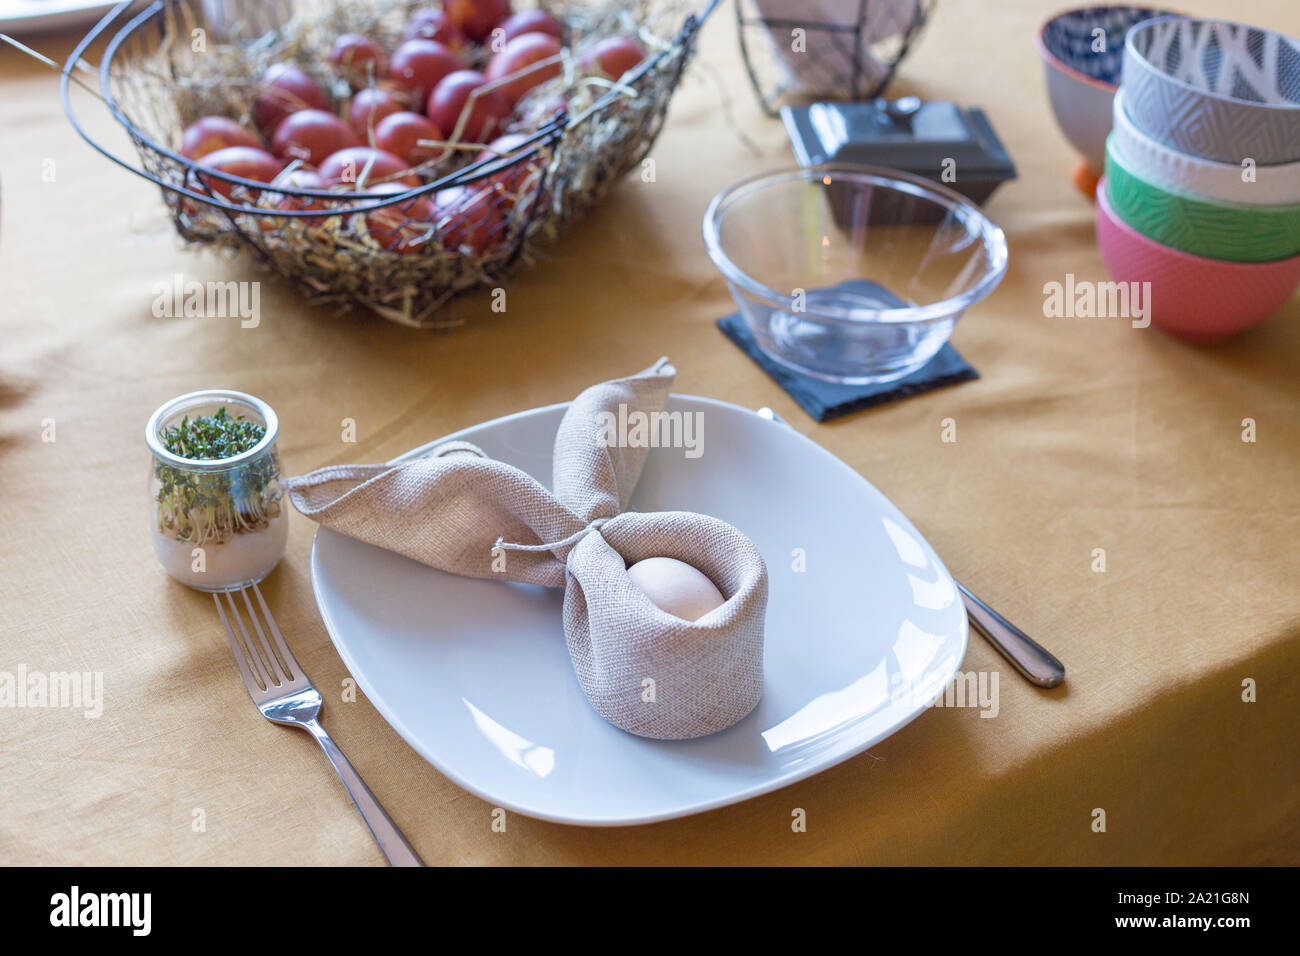 Real family table set for Easter breakfast in traditional Polish home. Basket filled with eggs colored with onion skins. Stock Photo